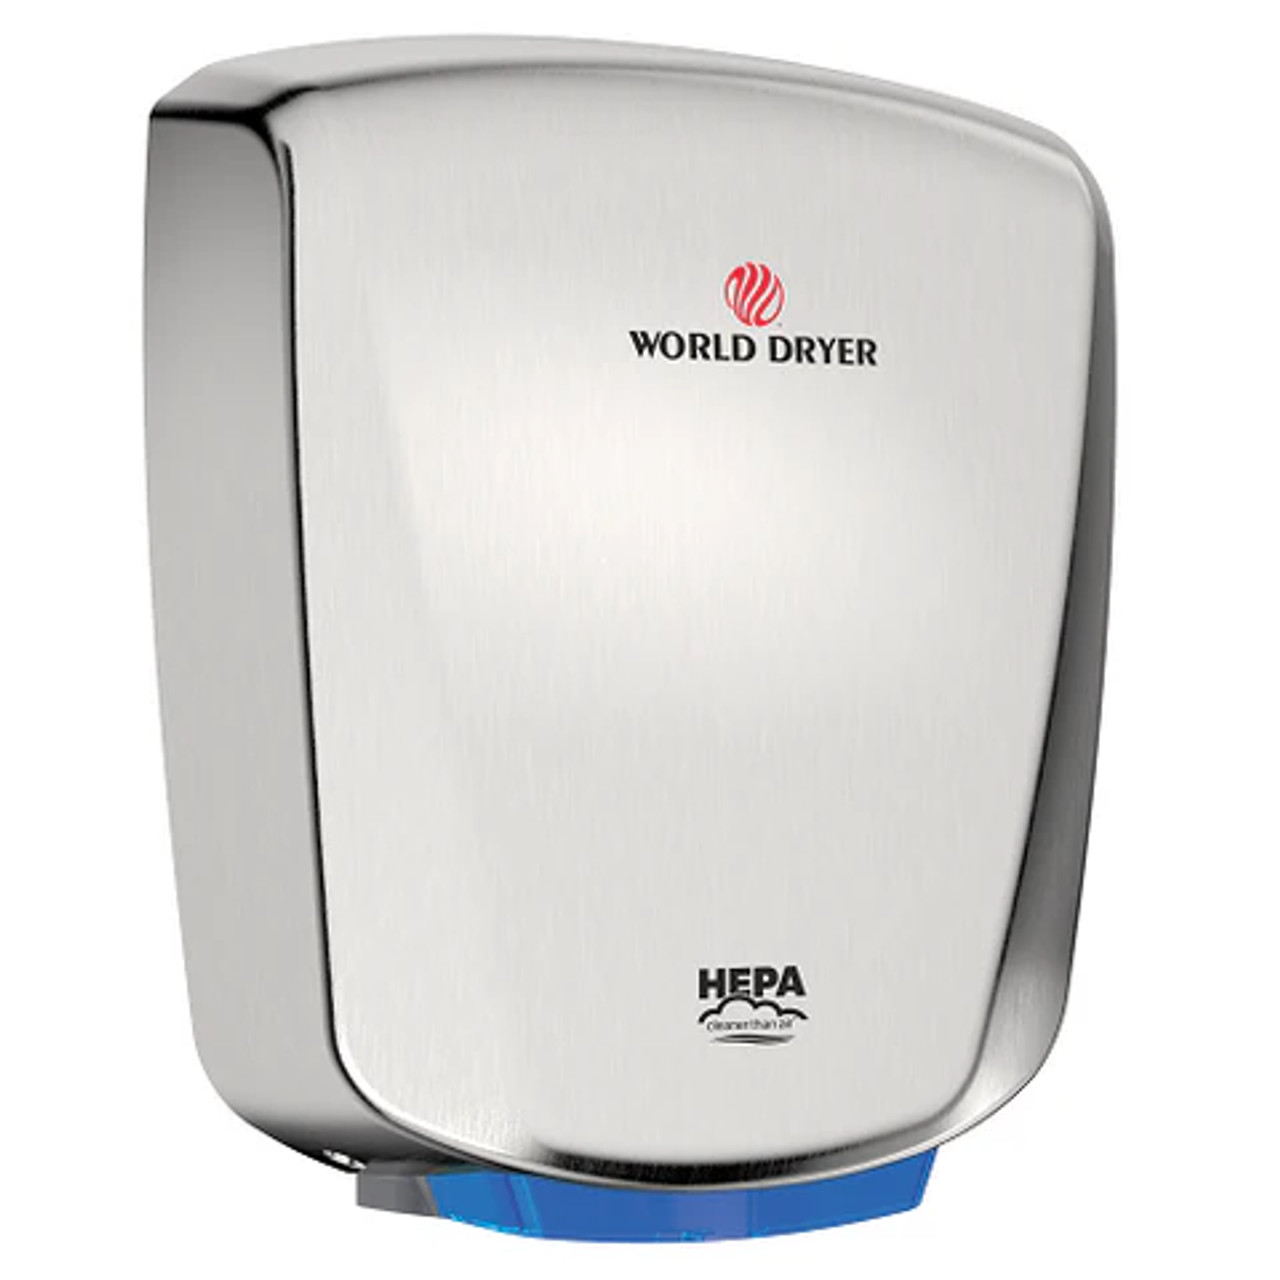 World Dryer Automatic Hand Dryer - 12 Second Dry Time, Brushed Stainless Steel - Chicken Pieces